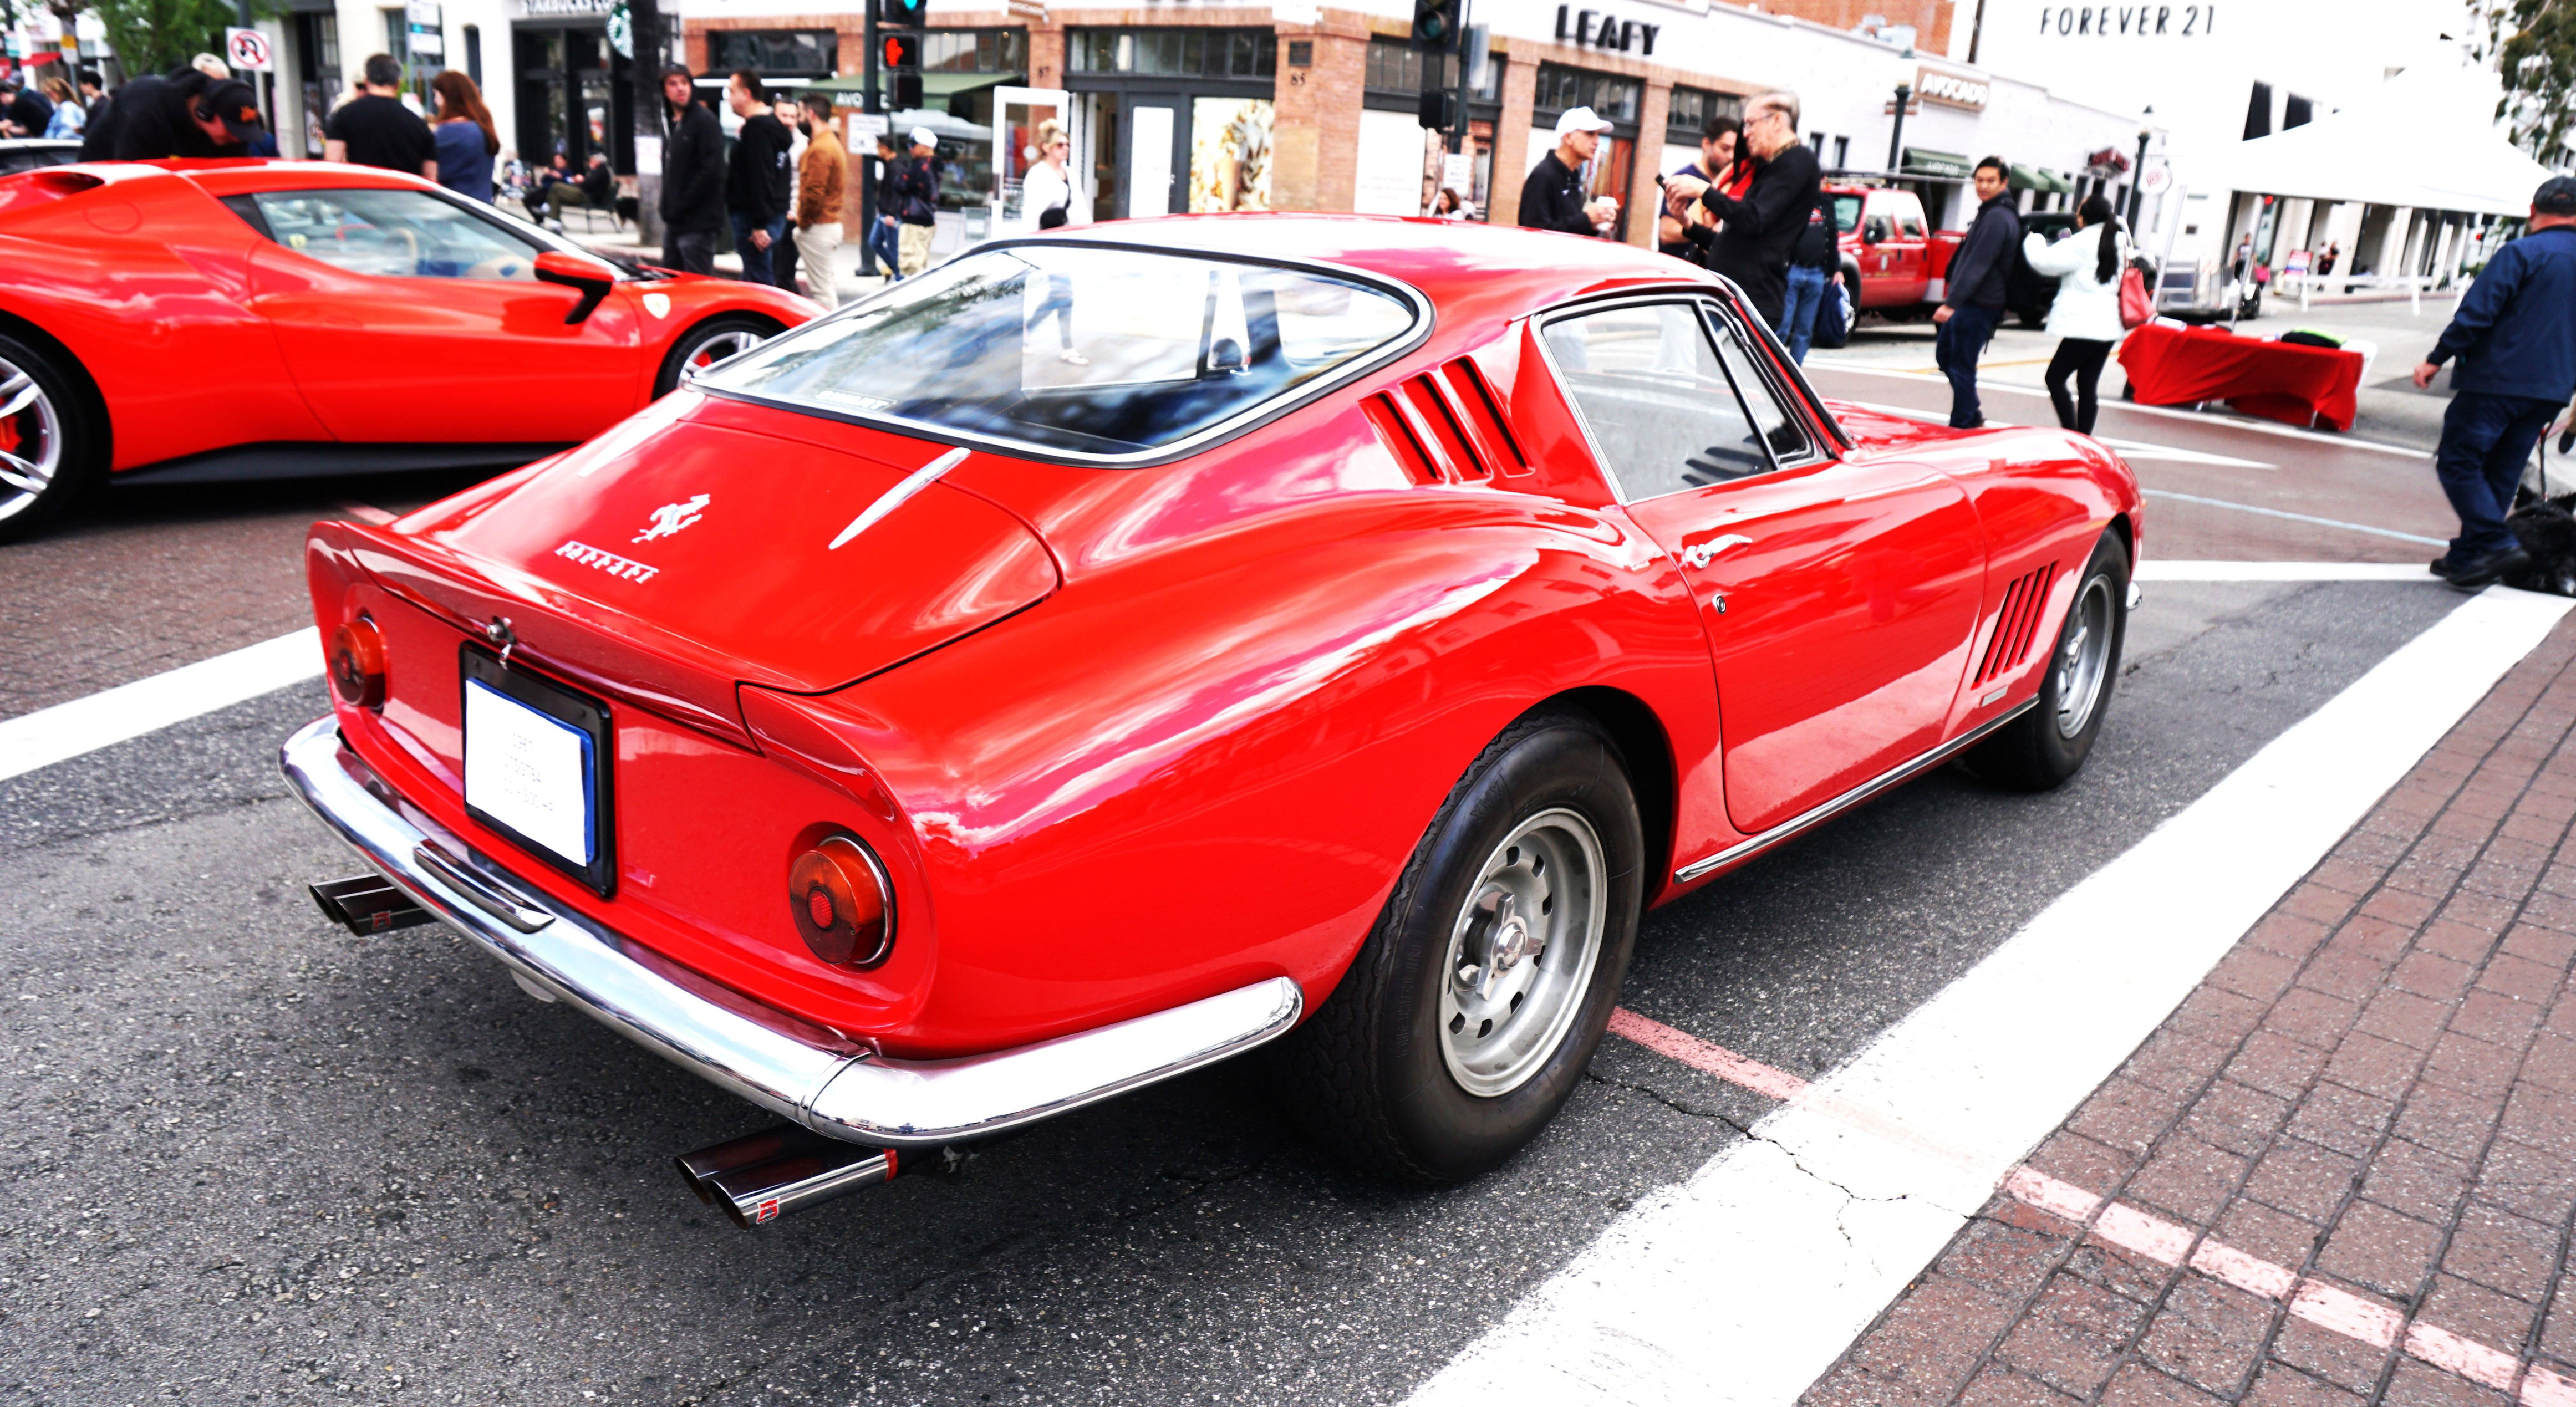 <p>Thousands of <em>tifosi </em>turned out for the 30th anniversary of Concorso Ferrari in Pasadena, Calif., put on by the Ferrari Club of America Southwest Region. The event is open and free for all, with cars scattered all up and down Colorado Boulevard. <em>Bene! Bene! </em></p>